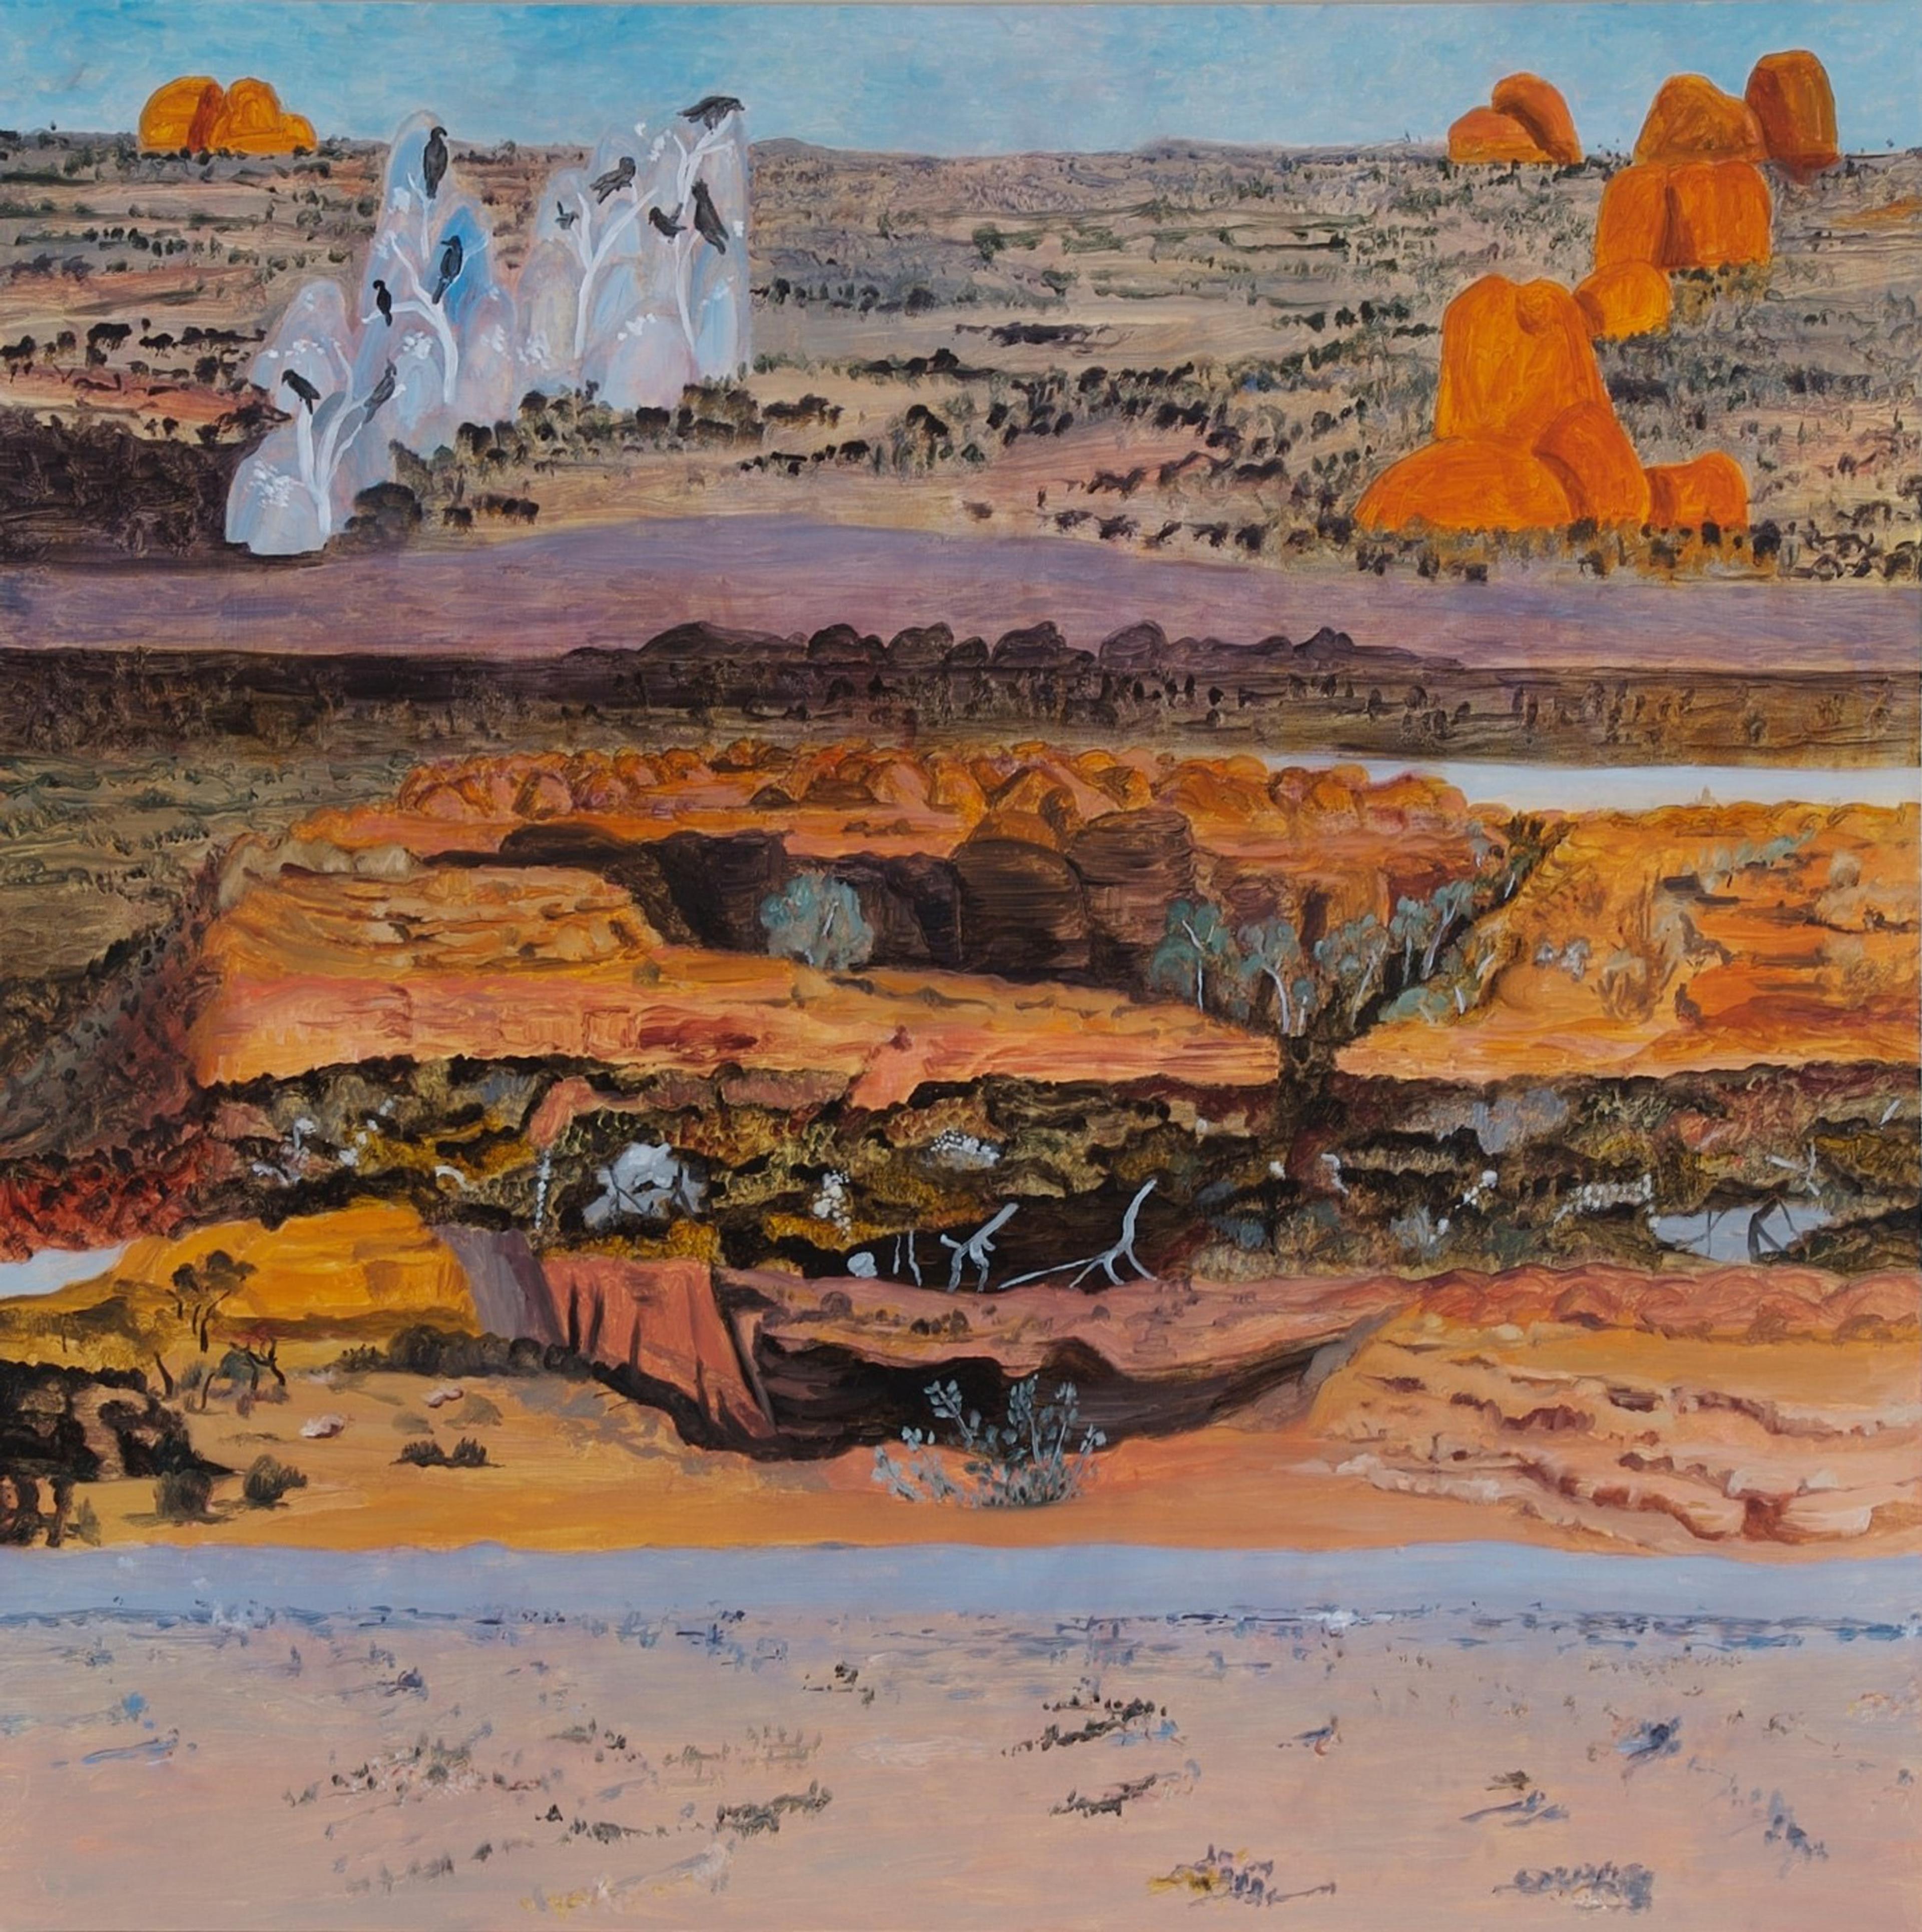 Barbara Tuck, When the water came, 2012, oil on board, 800 x 800mm. Courtesy of the artist